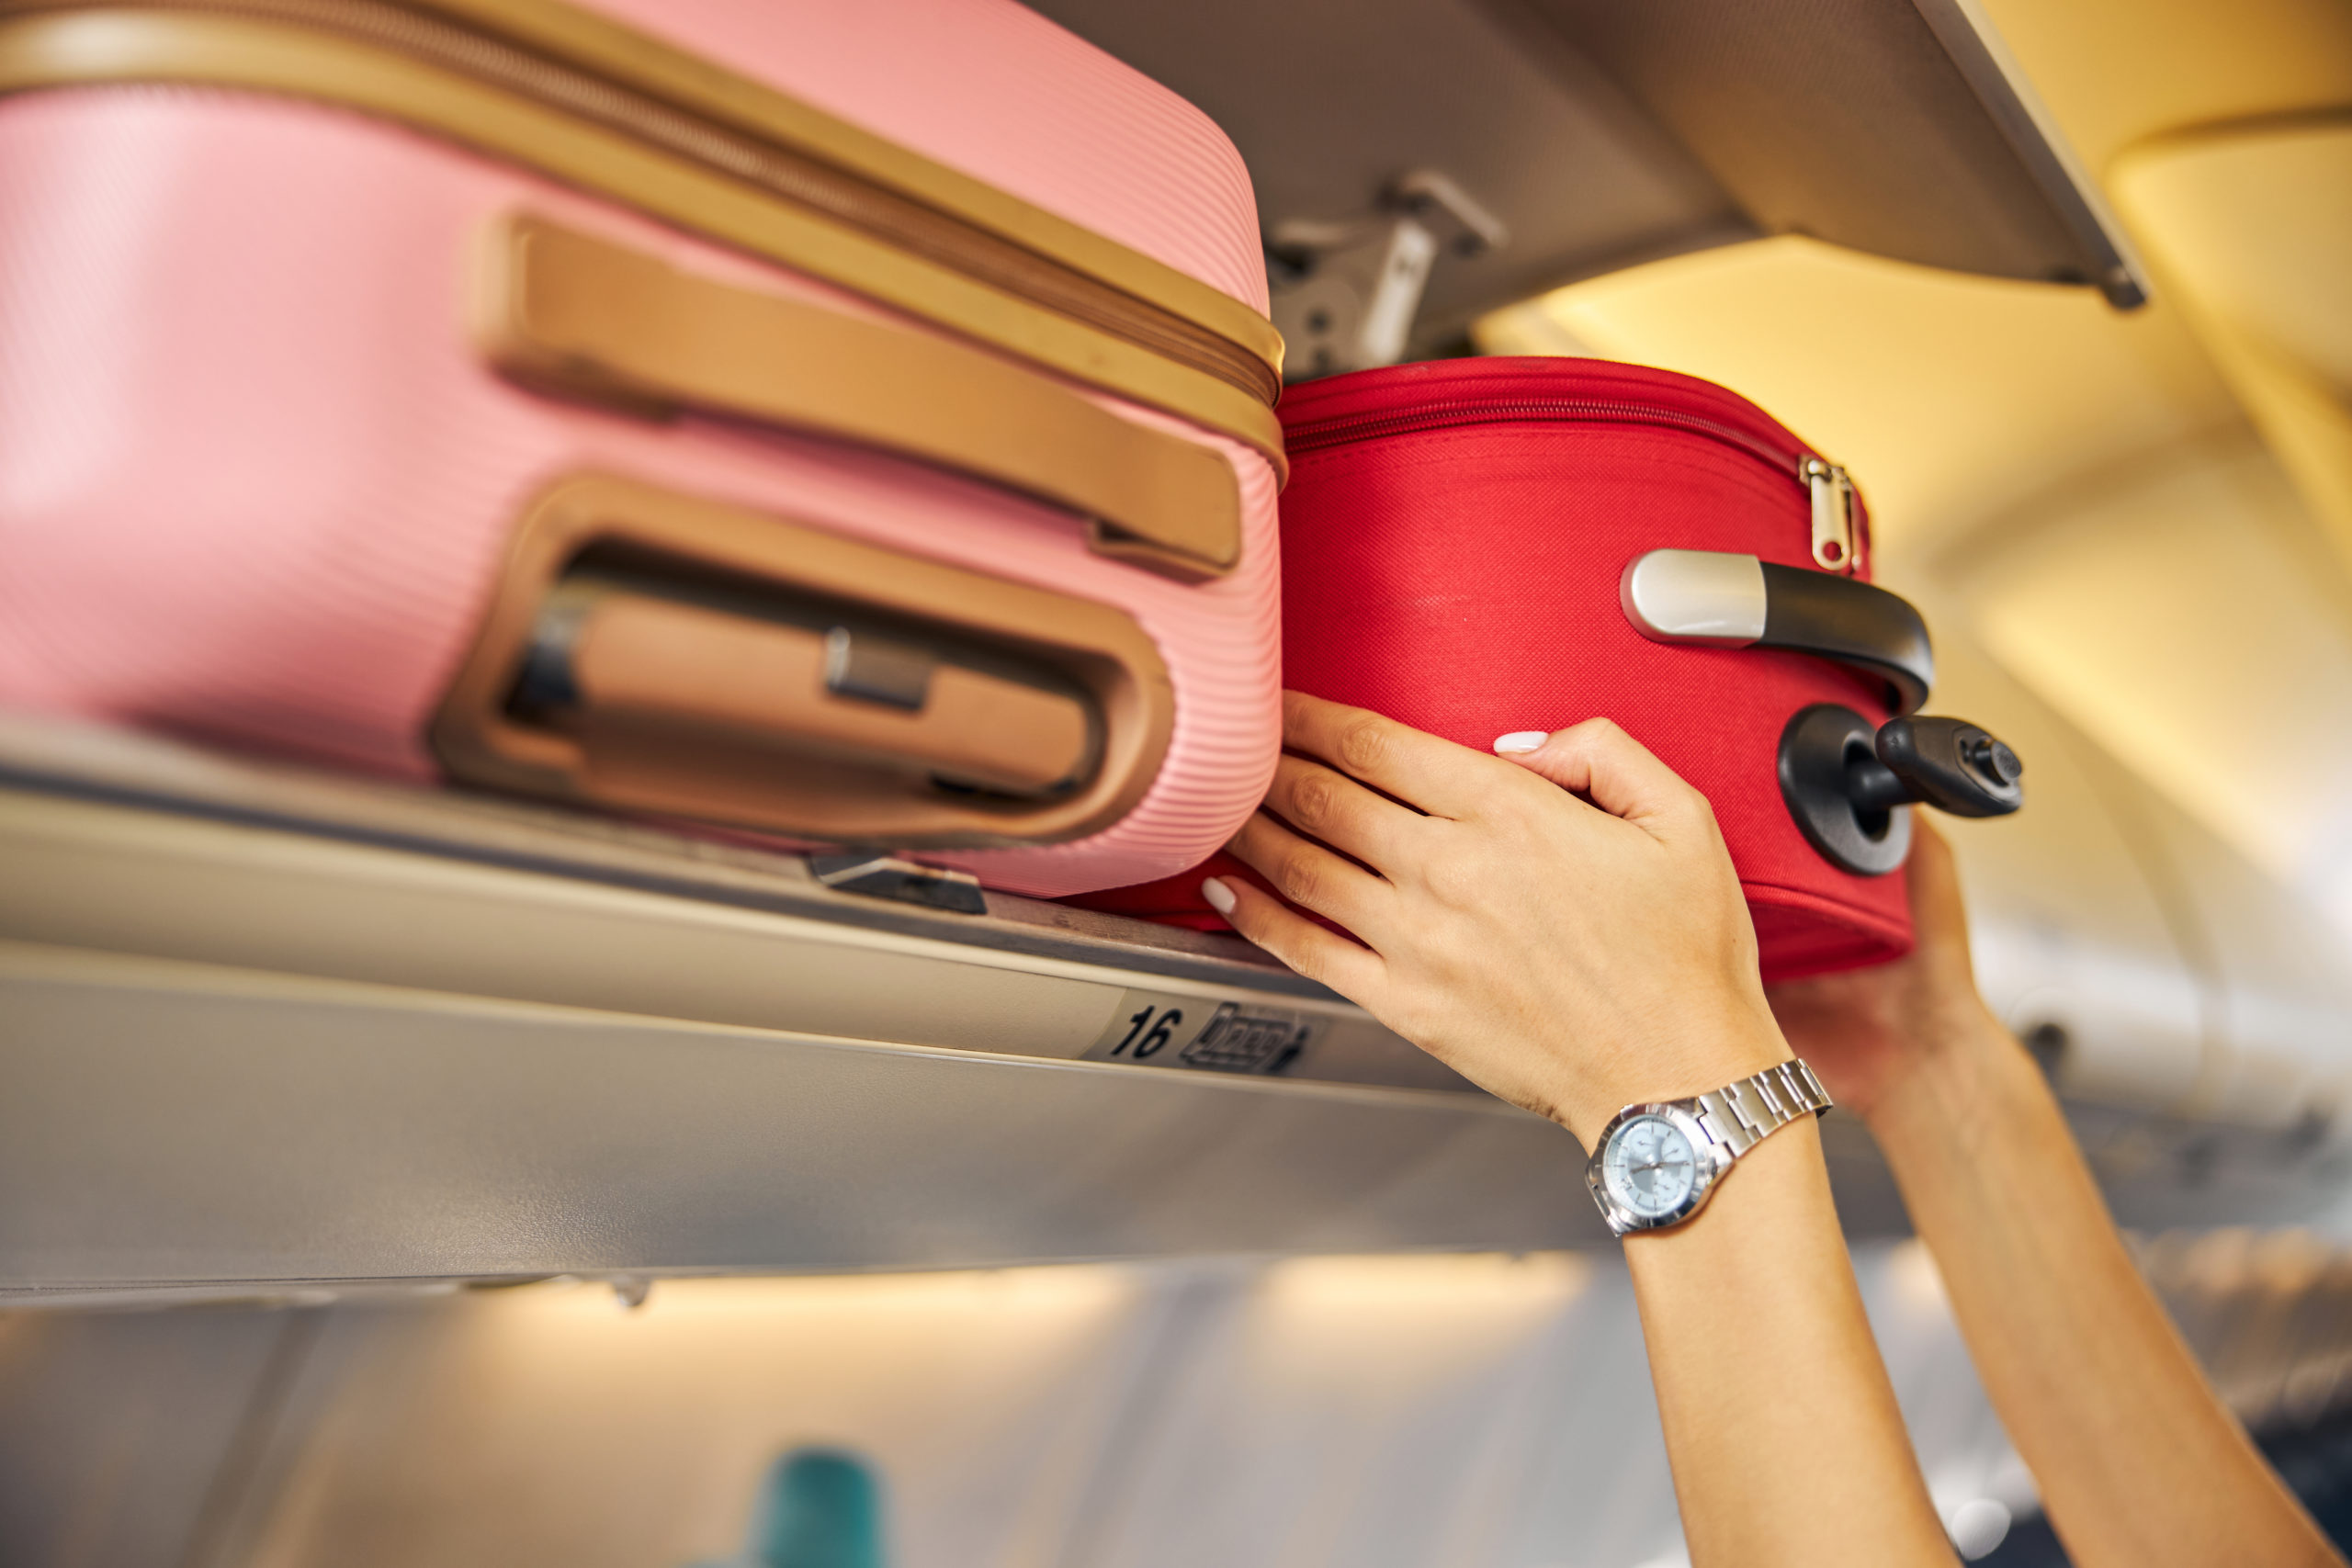 The 6 Best Carry-On Luggage Pieces of 2023